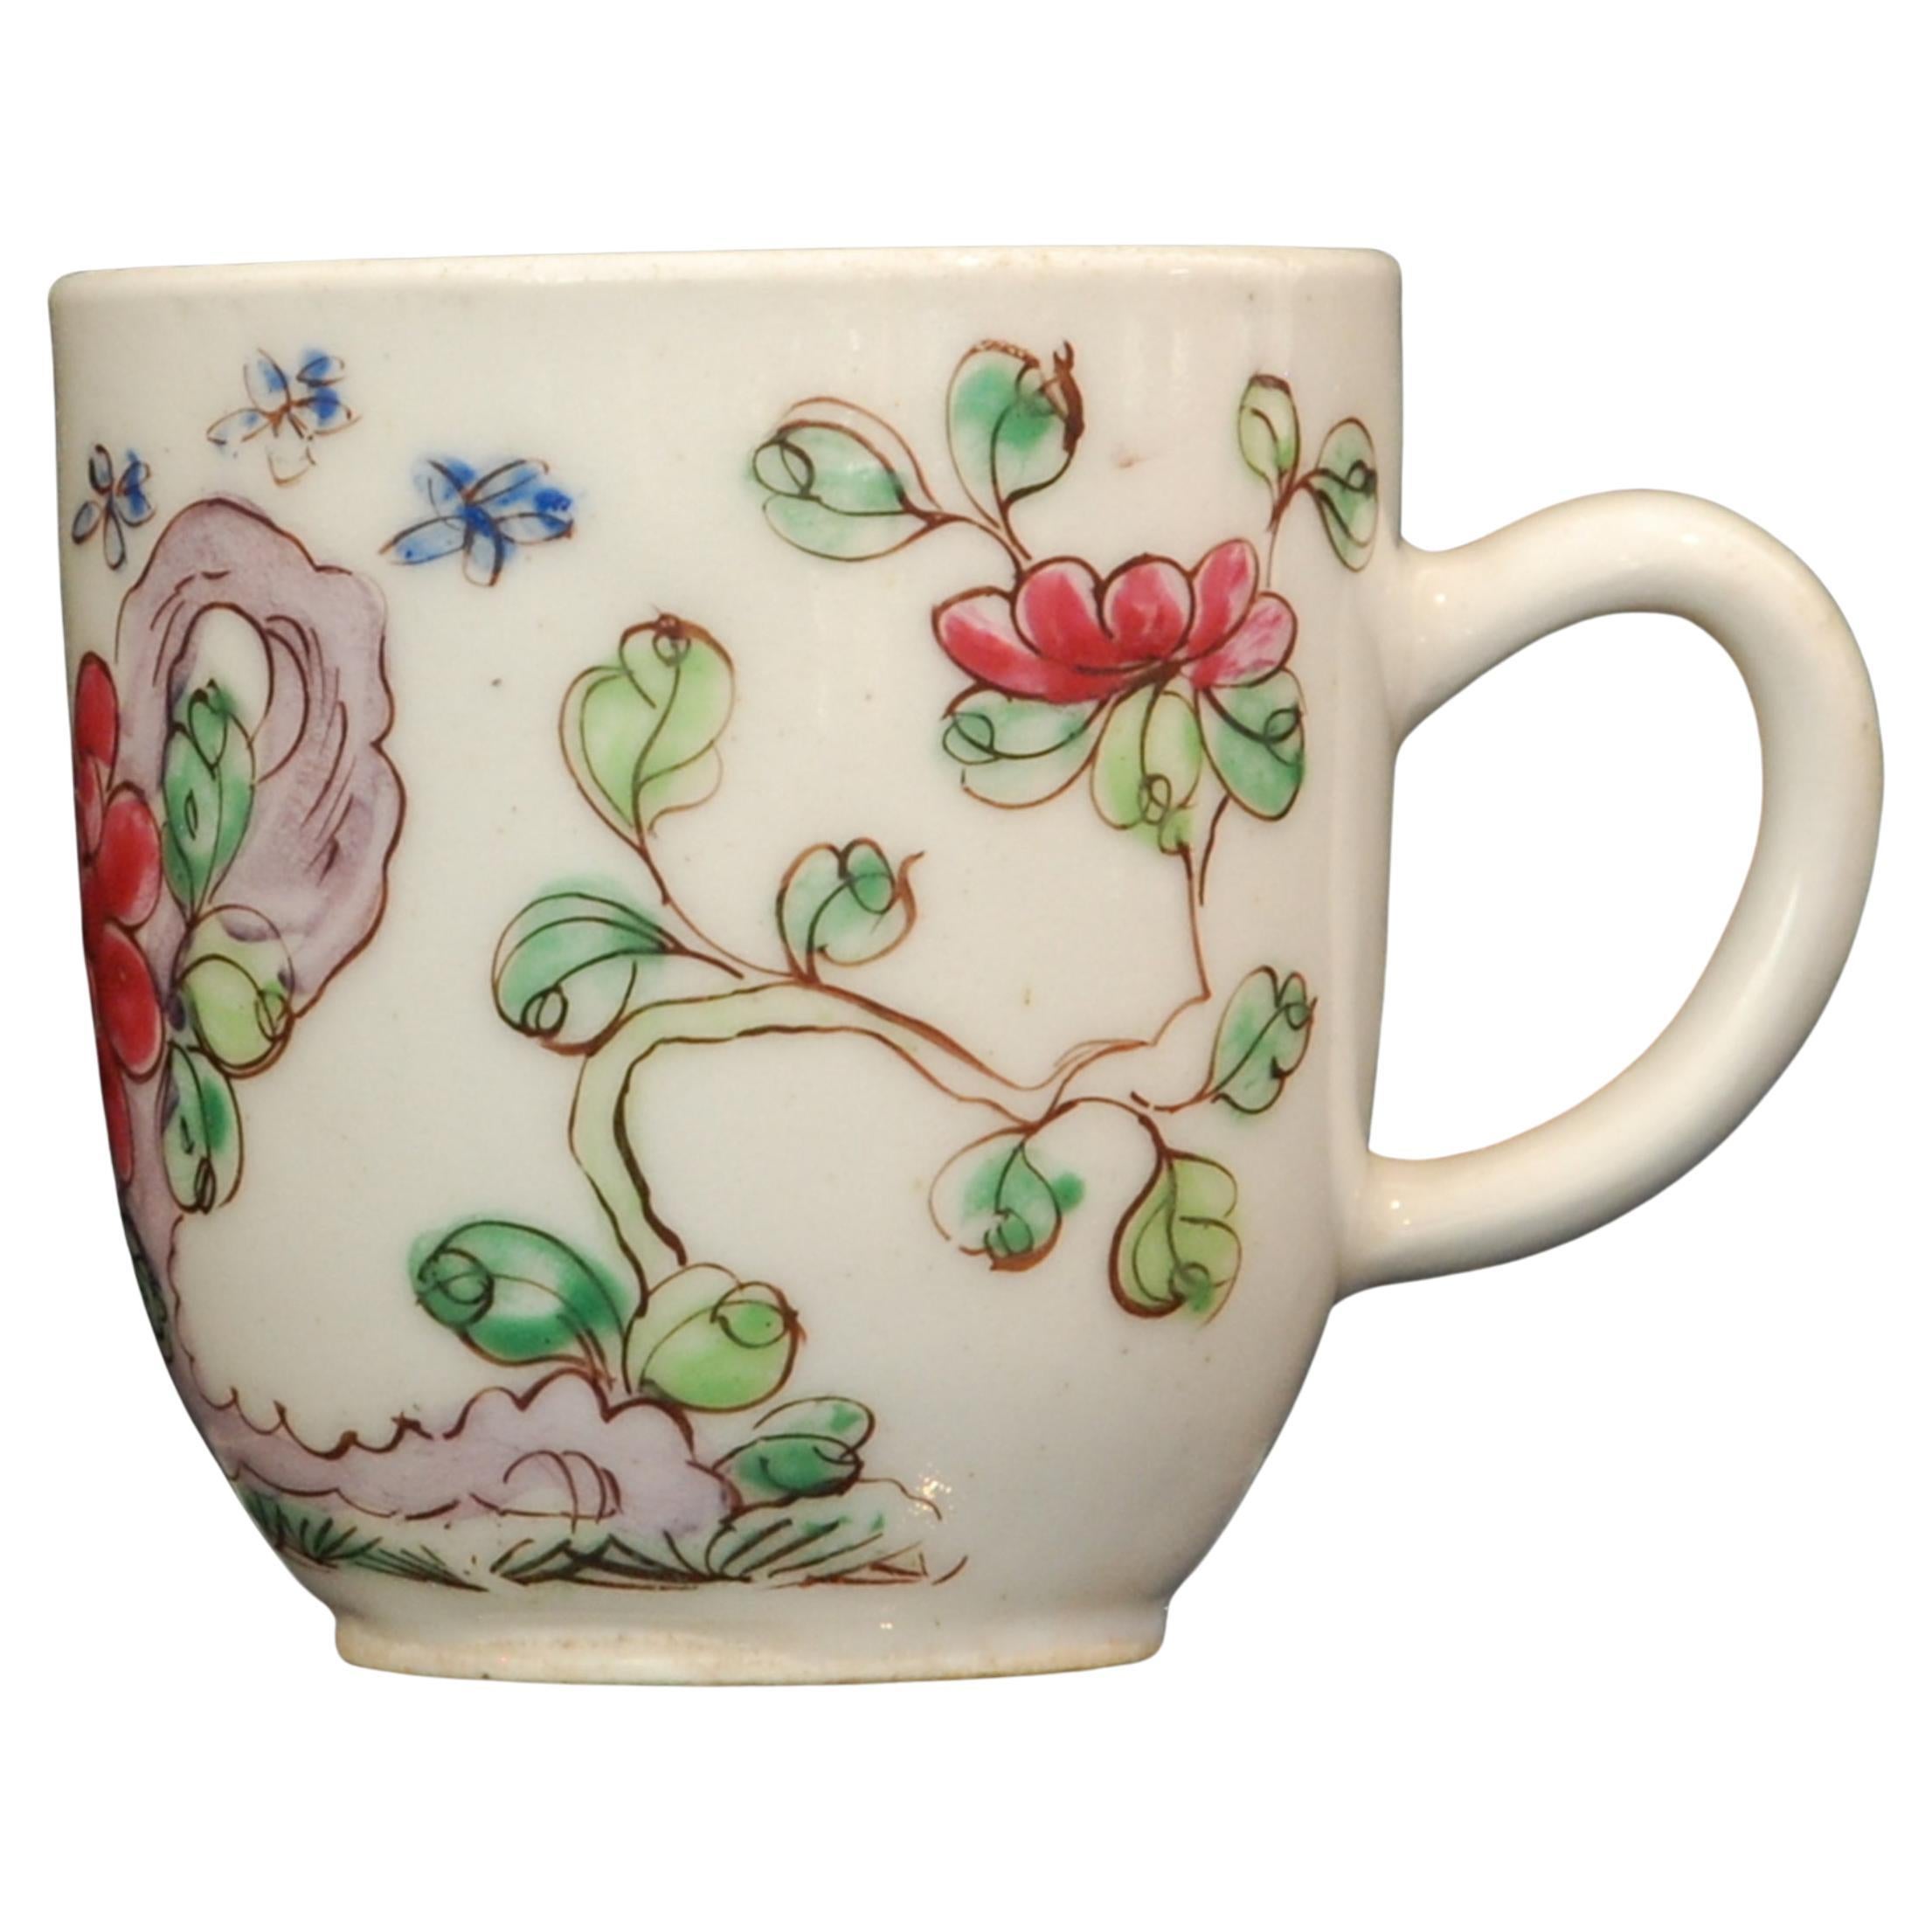 Coffee Cup with Famille Rose decoration, Bow Porcelain, circa 1750